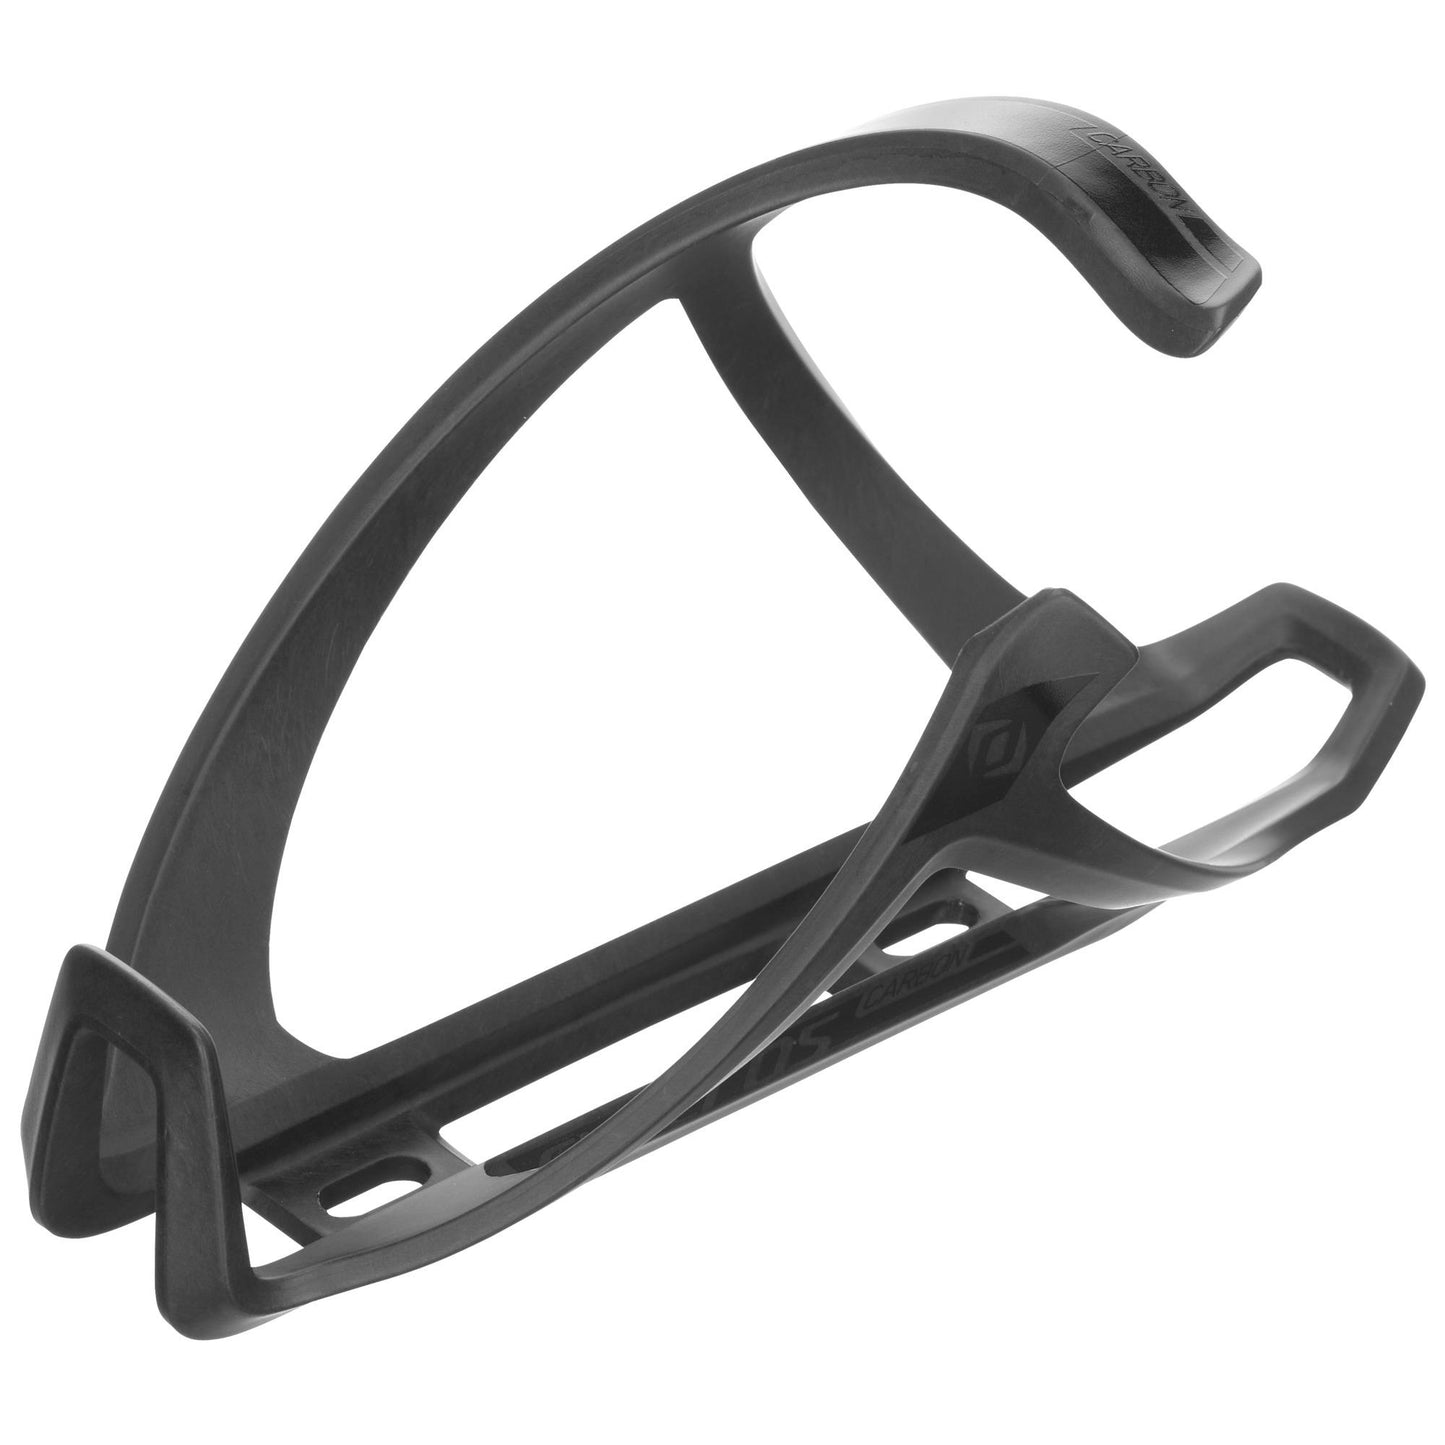 Syncros Bottle Cage Tailor cage 1.0 Right